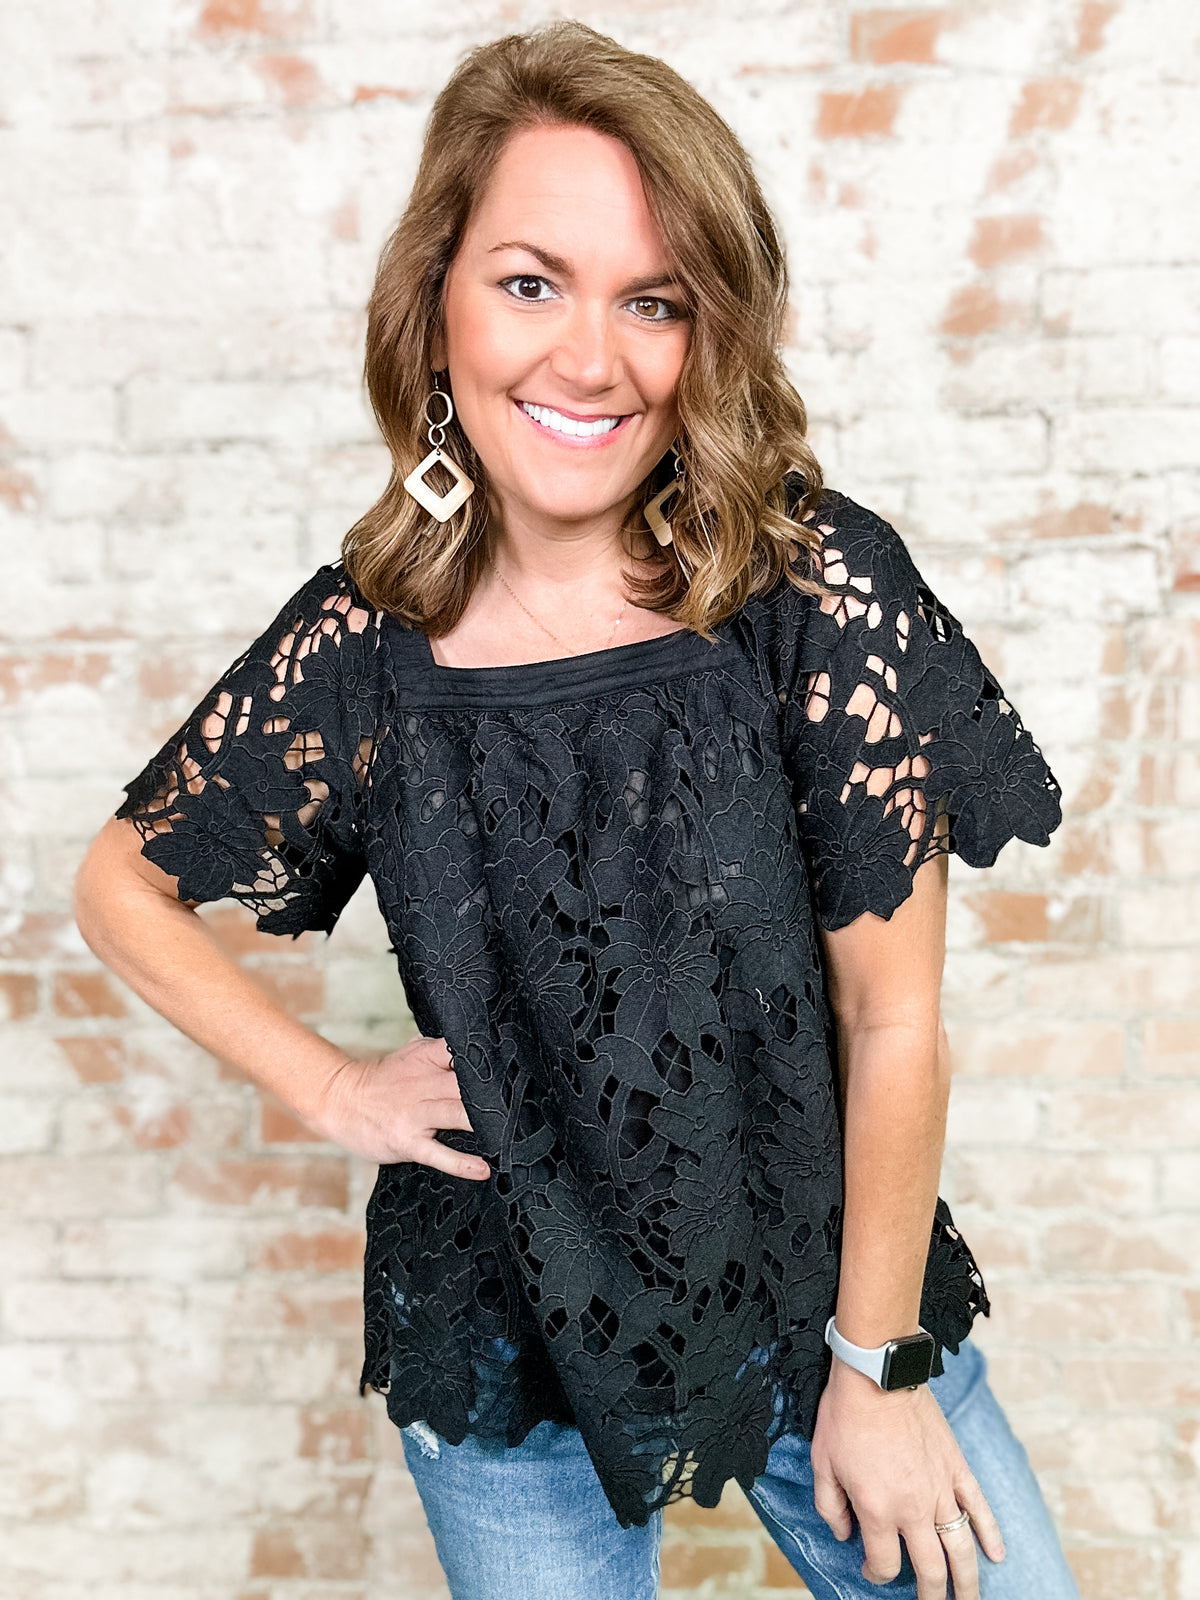 Stacey Floral Lace Top